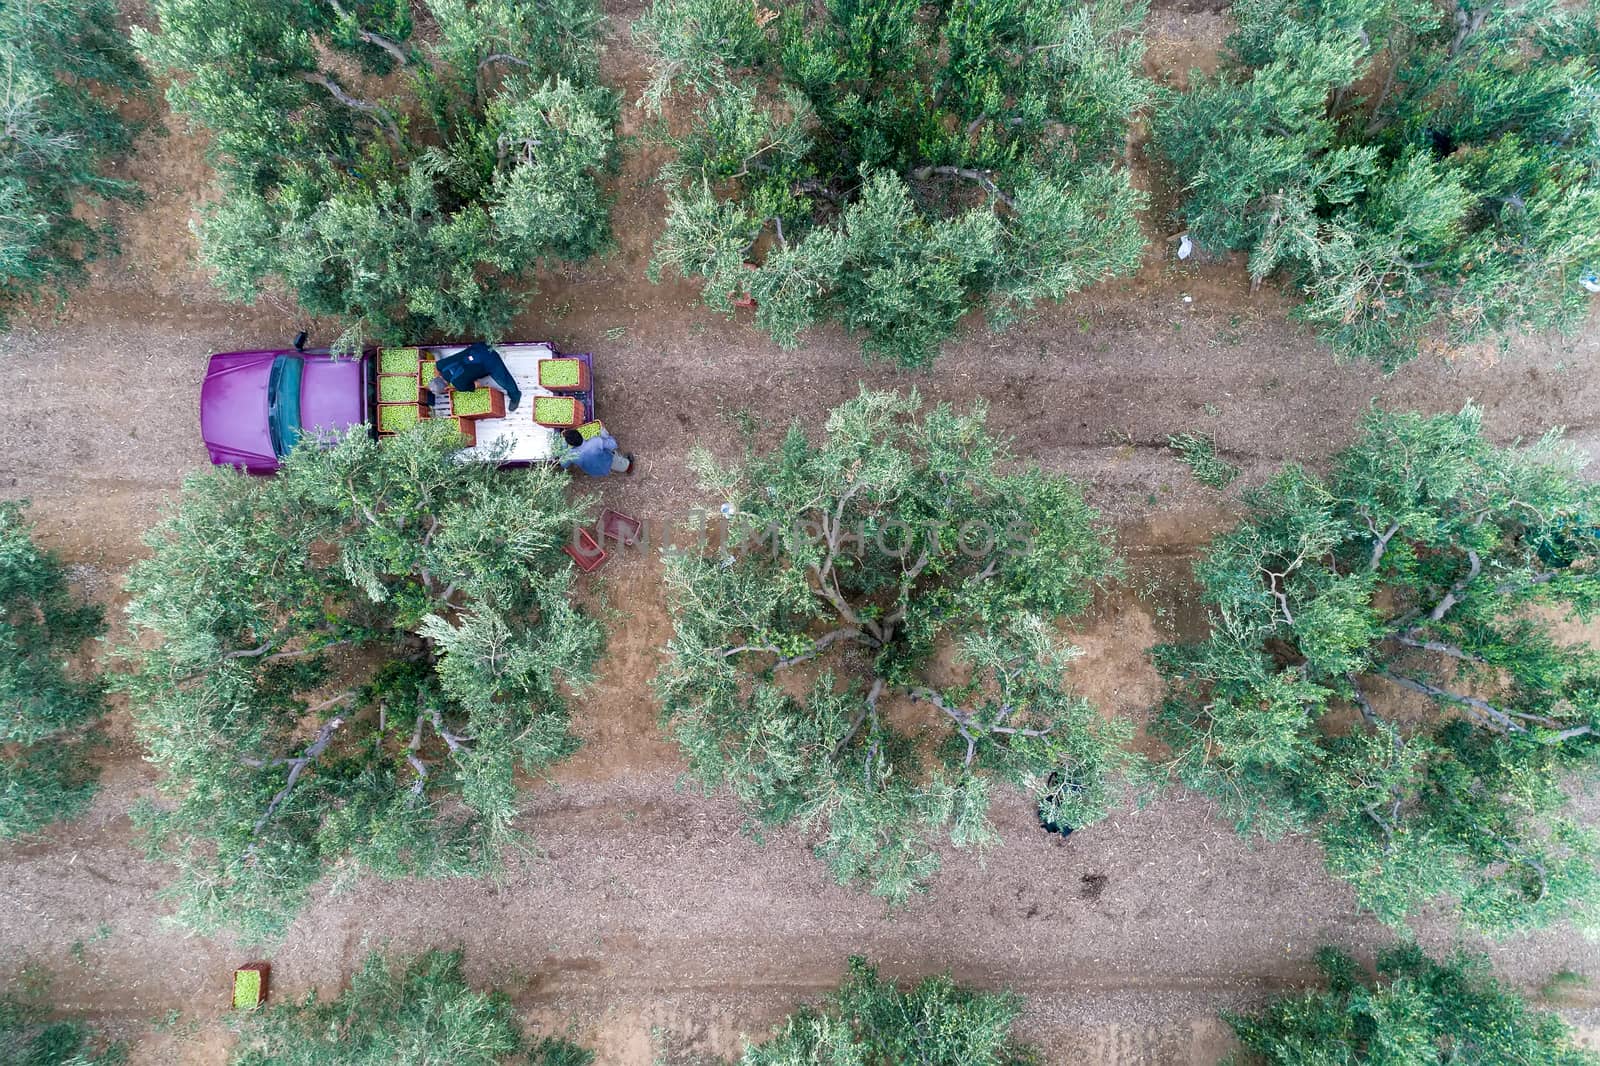 Olives harvesting in a field in Chalkidiki,  Greece by ververidis